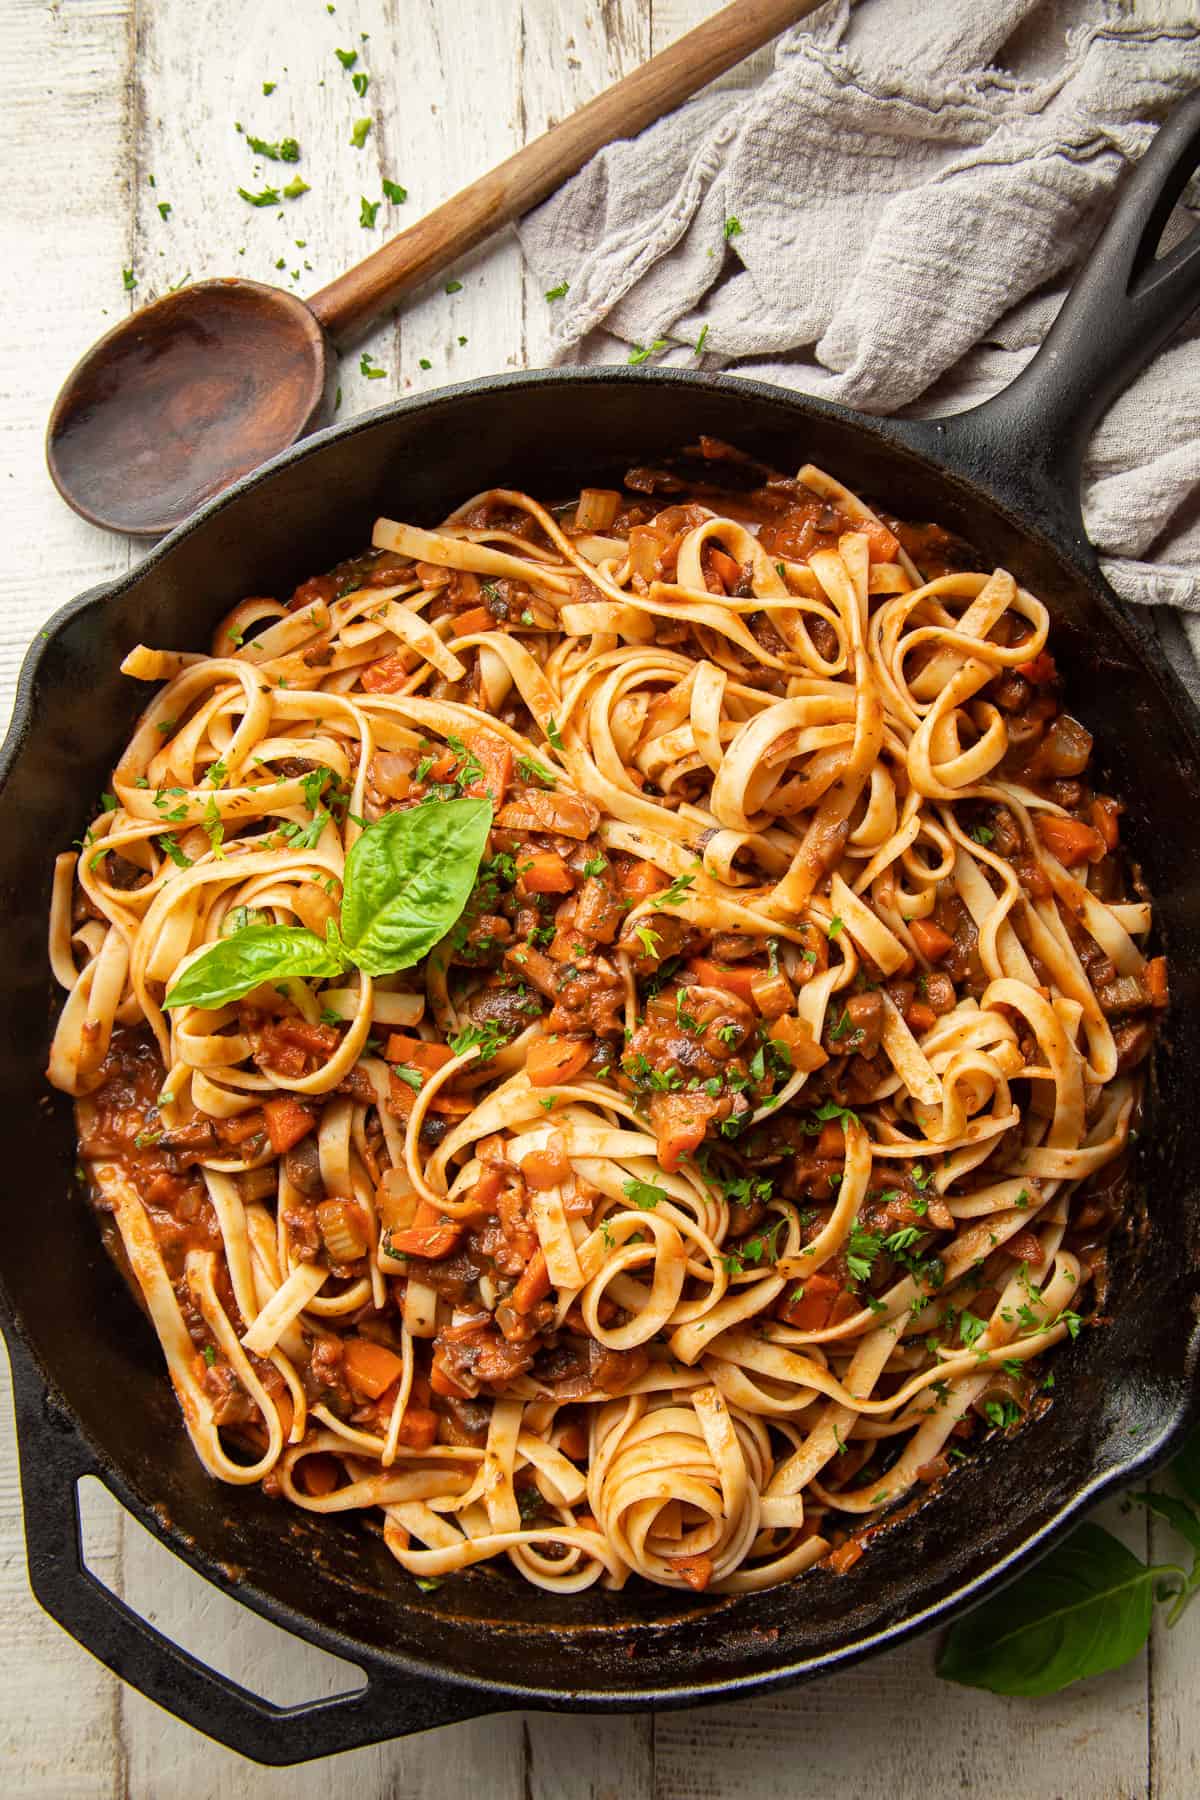 Skillet full of pasta with Mushroom Bolognese on a white wooden surface.